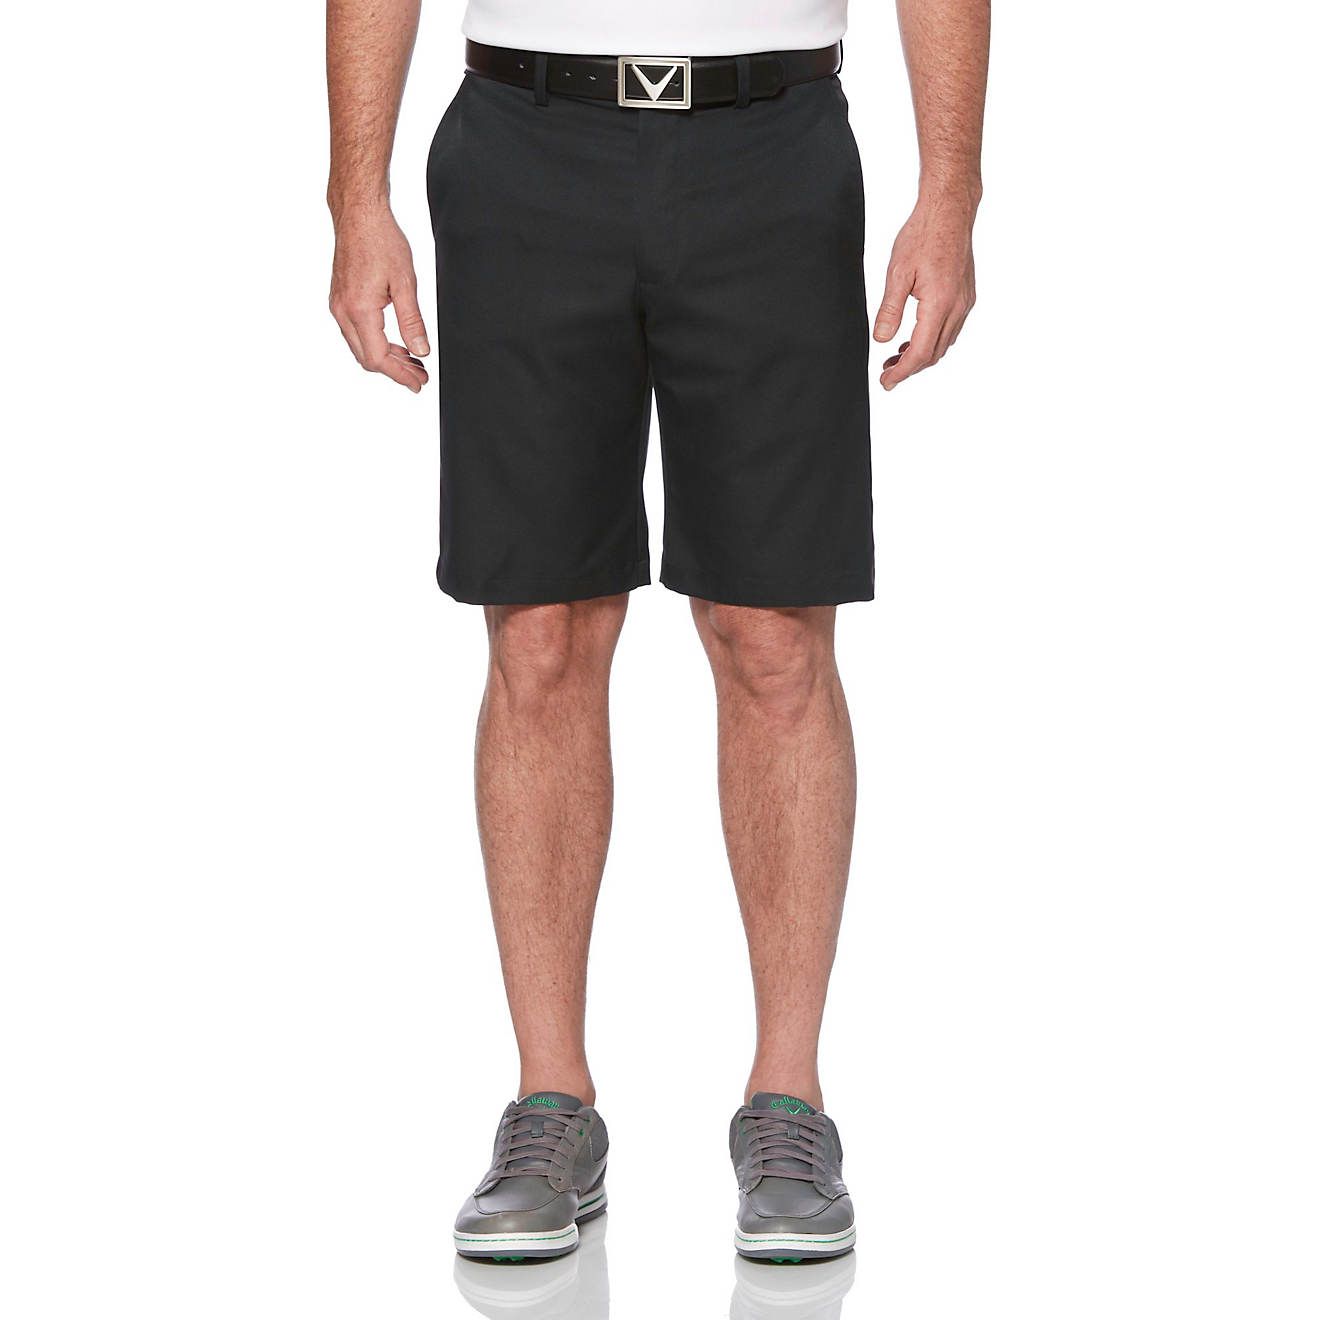 Callaway Men's Pro Spin Golf Shorts | Academy Sports + Outdoor Affiliate